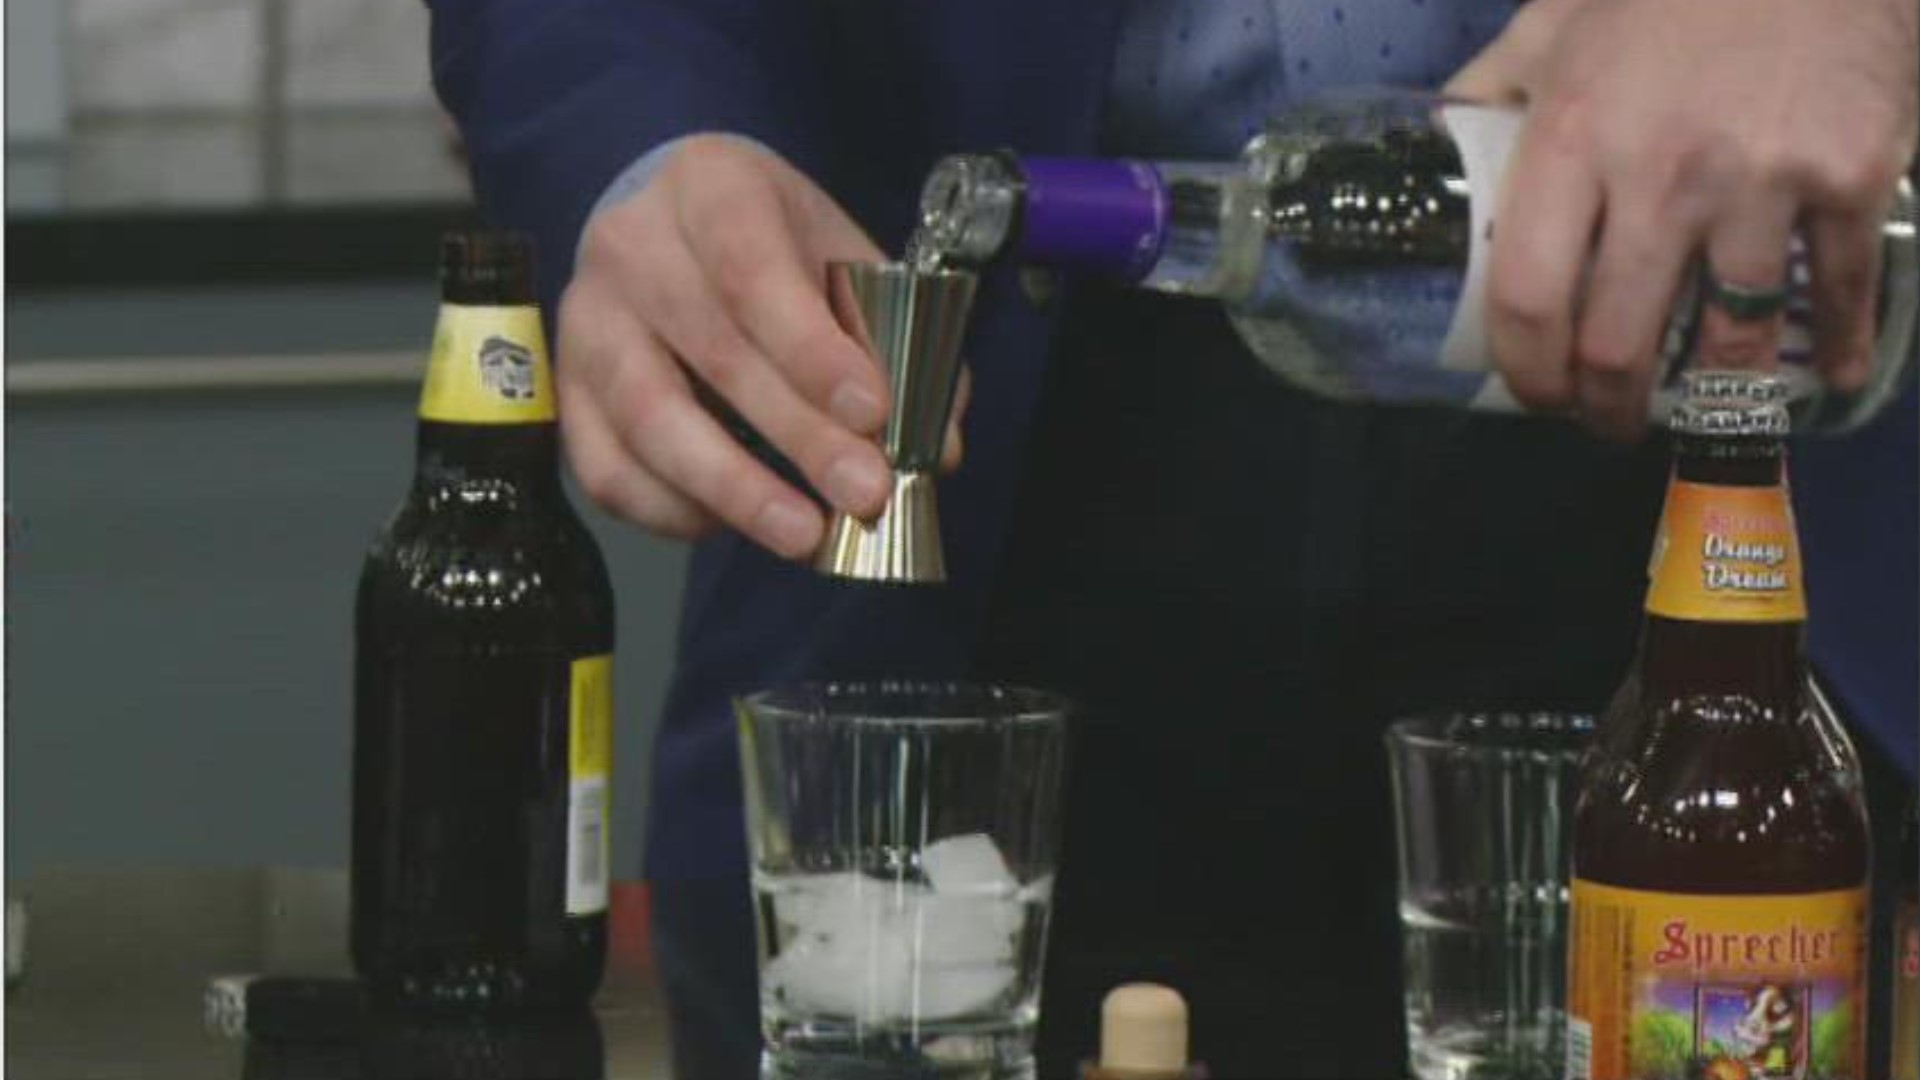 One Wisconsin brewing and craft soda company joined KARE11 Saturday to show how people are using their sodas to make one-of-a-kind cocktails.